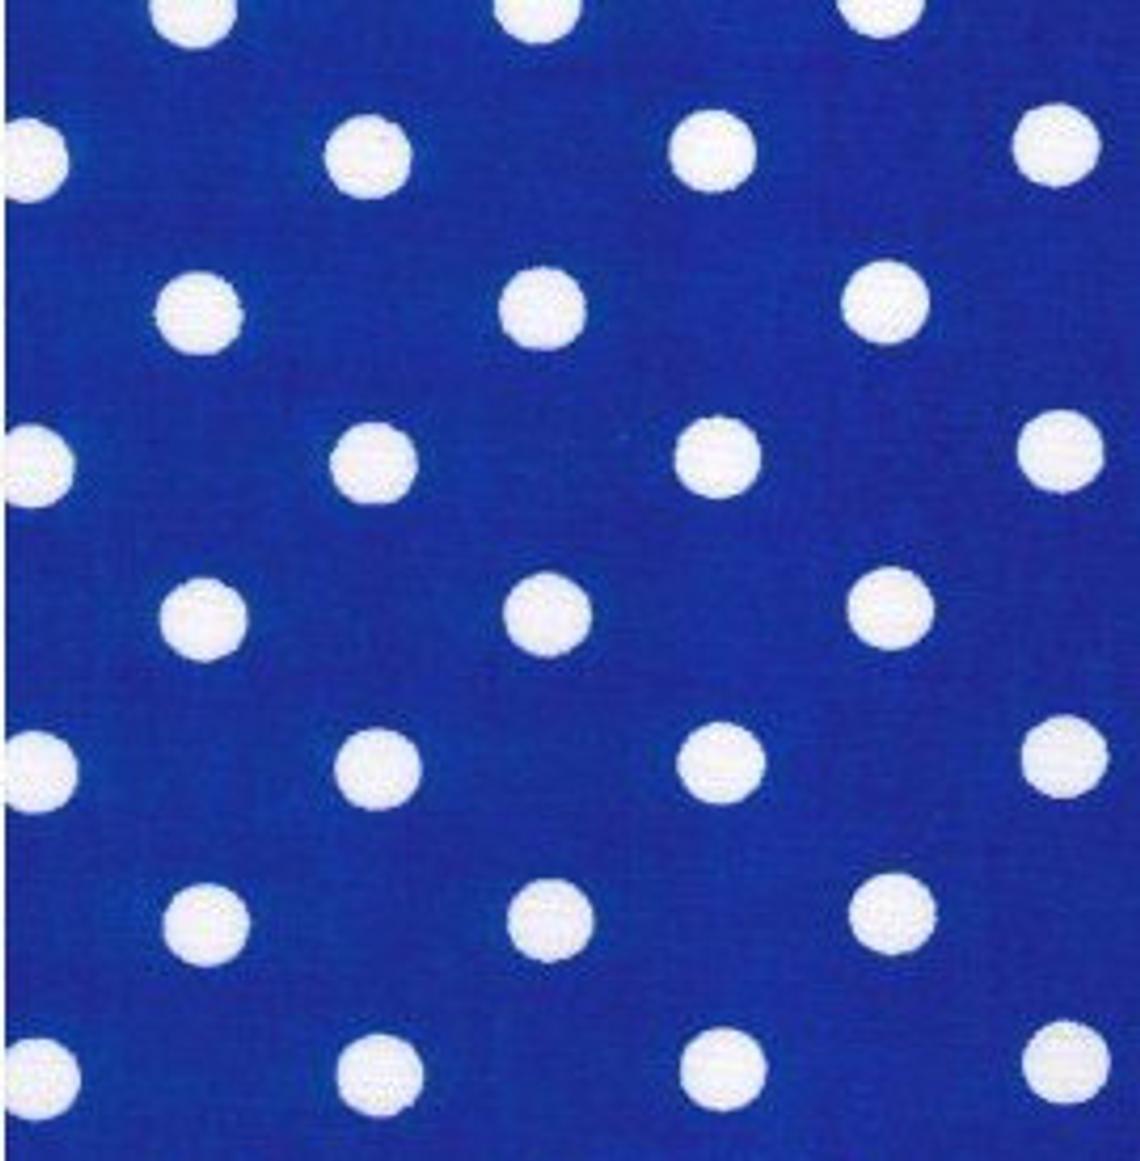 Excellent Quality Royal Blue 22mm Large Spotty Polka Dot 100% Cotton Poplin Fabric 130gsm Sewing Quilting Craft Home Decor